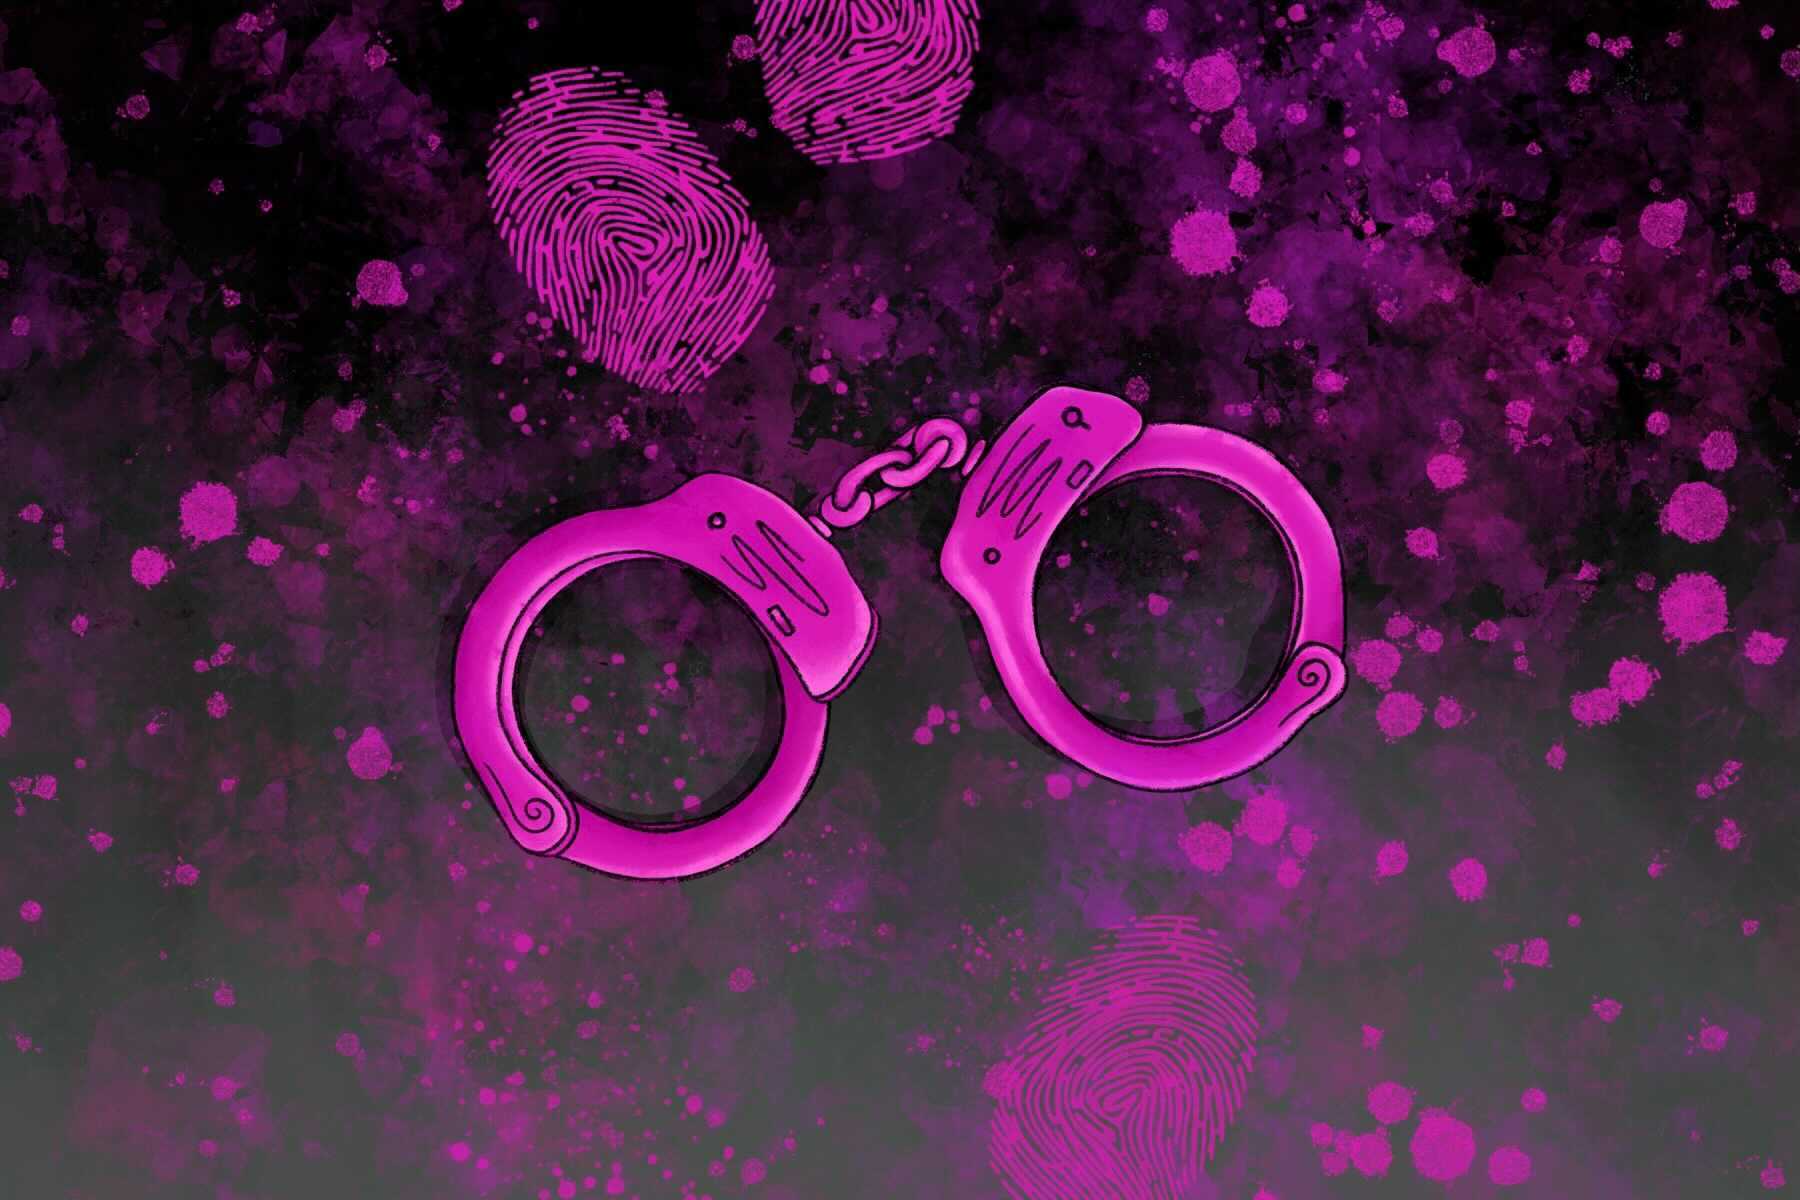 An illustration of handcuffs and fingerprints for an article about the podcast "True Crime Obsessed." (Illustration by Katelyn McManis, Columbia College Chicago)